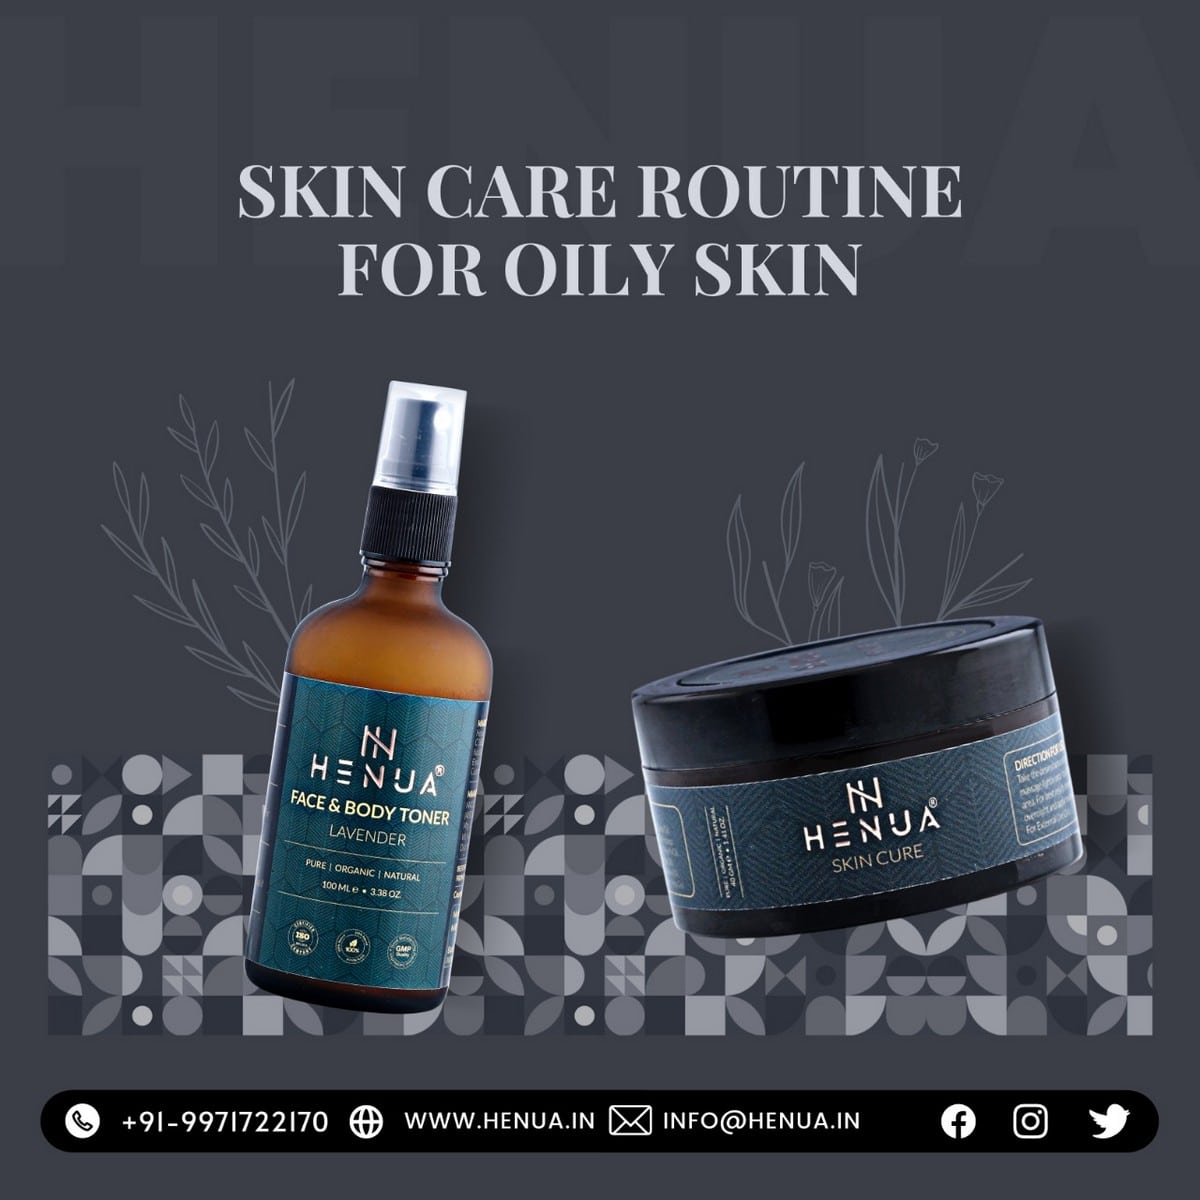 All-Natural-Products-For-Skin-Care-Routine-Of-Oily-Skin